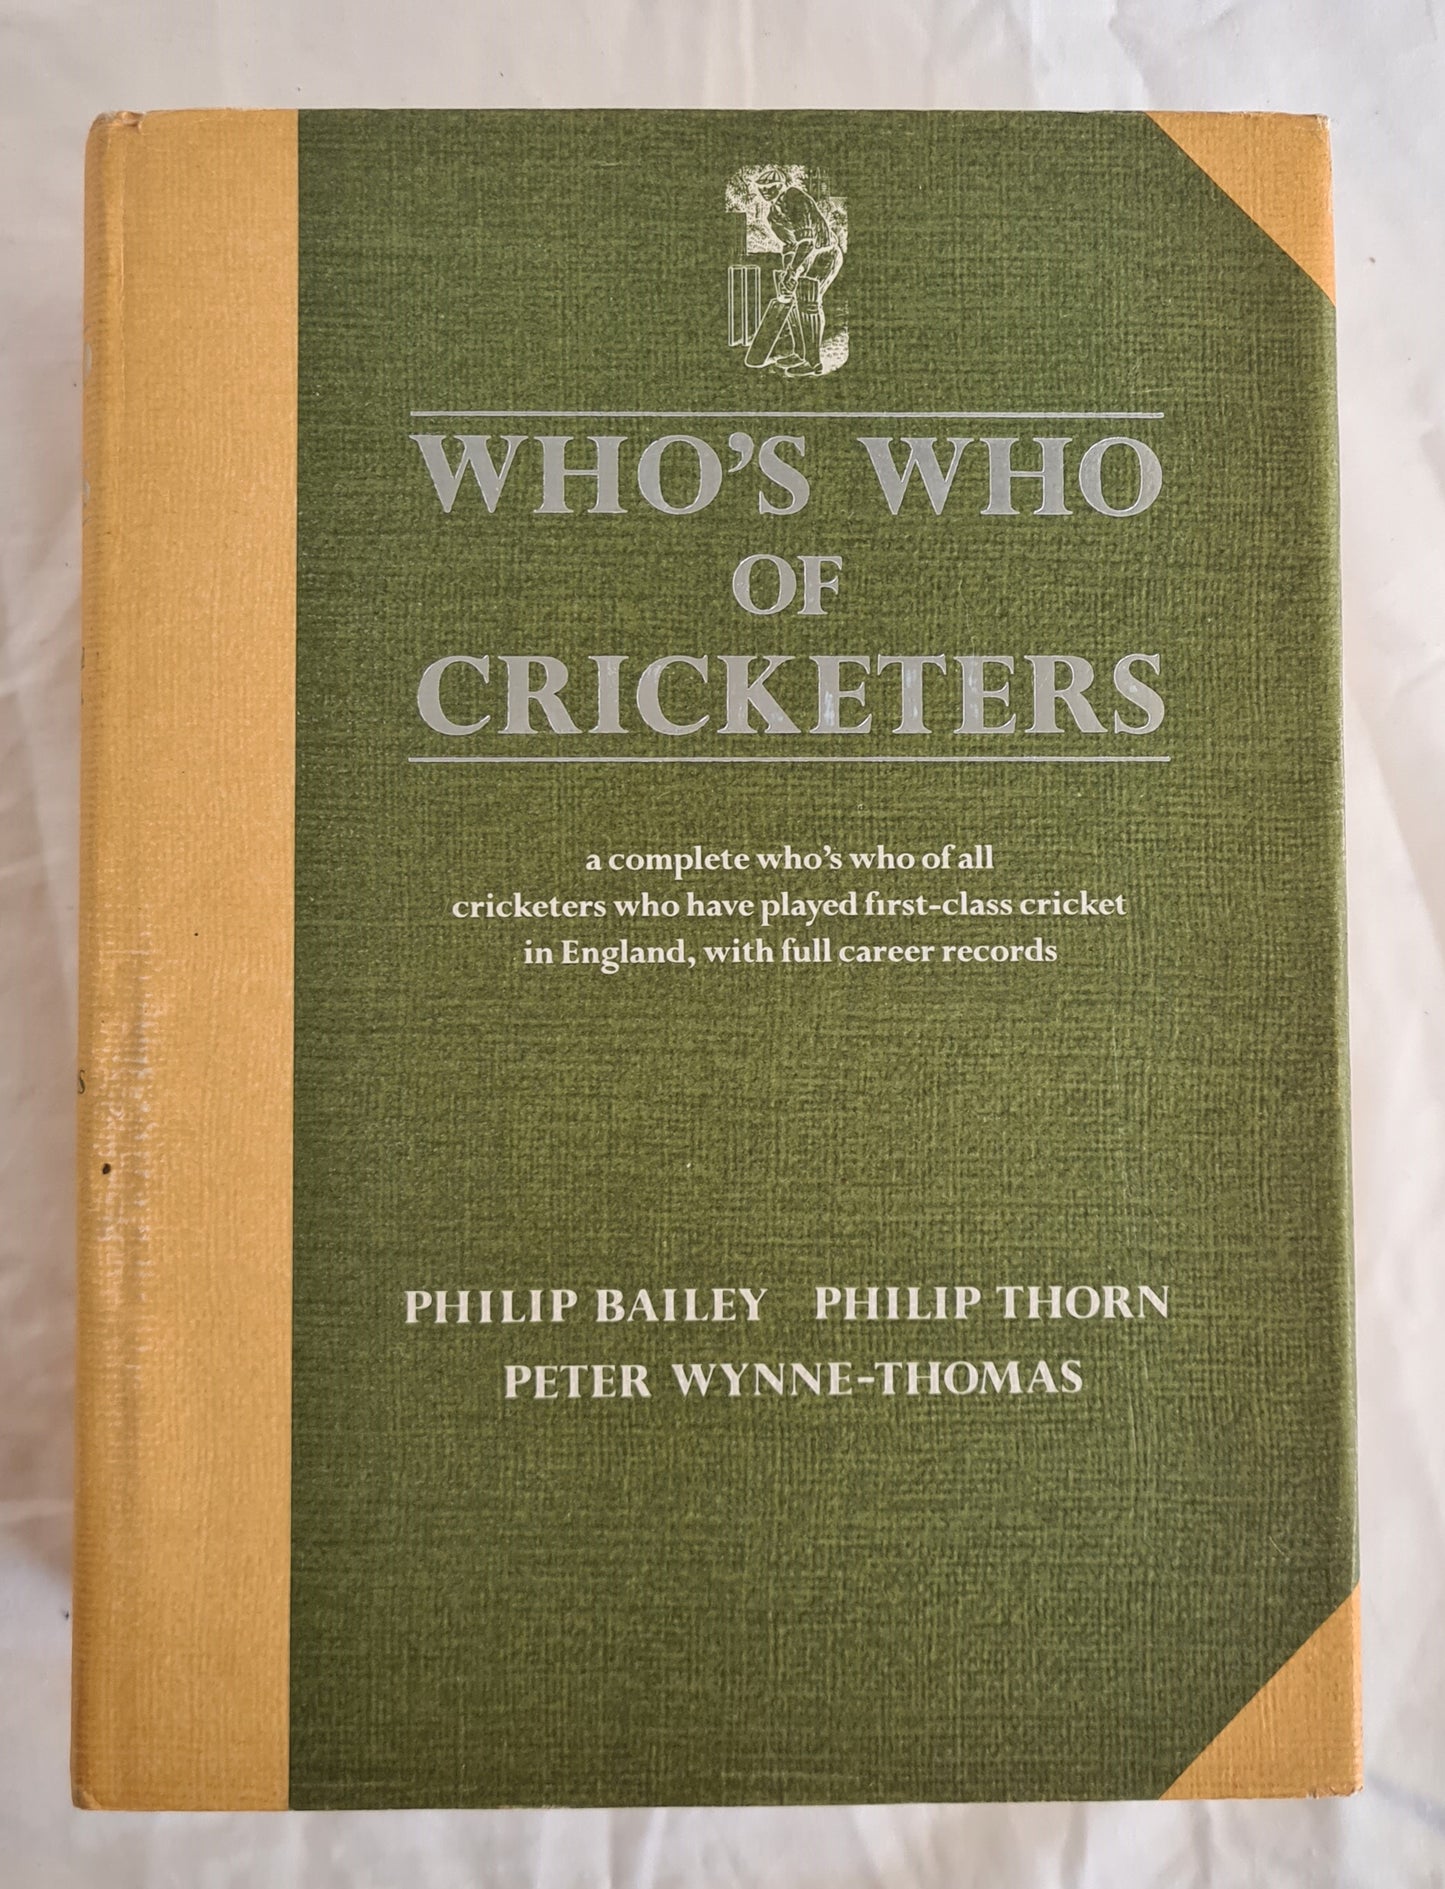 Who’s Who of Cricketers  A complete who’s who of all cricketers who have played first-class cricket in England, with full career records  by Philip Bailey, Philip Thorn and Peter Wynne-Thomas